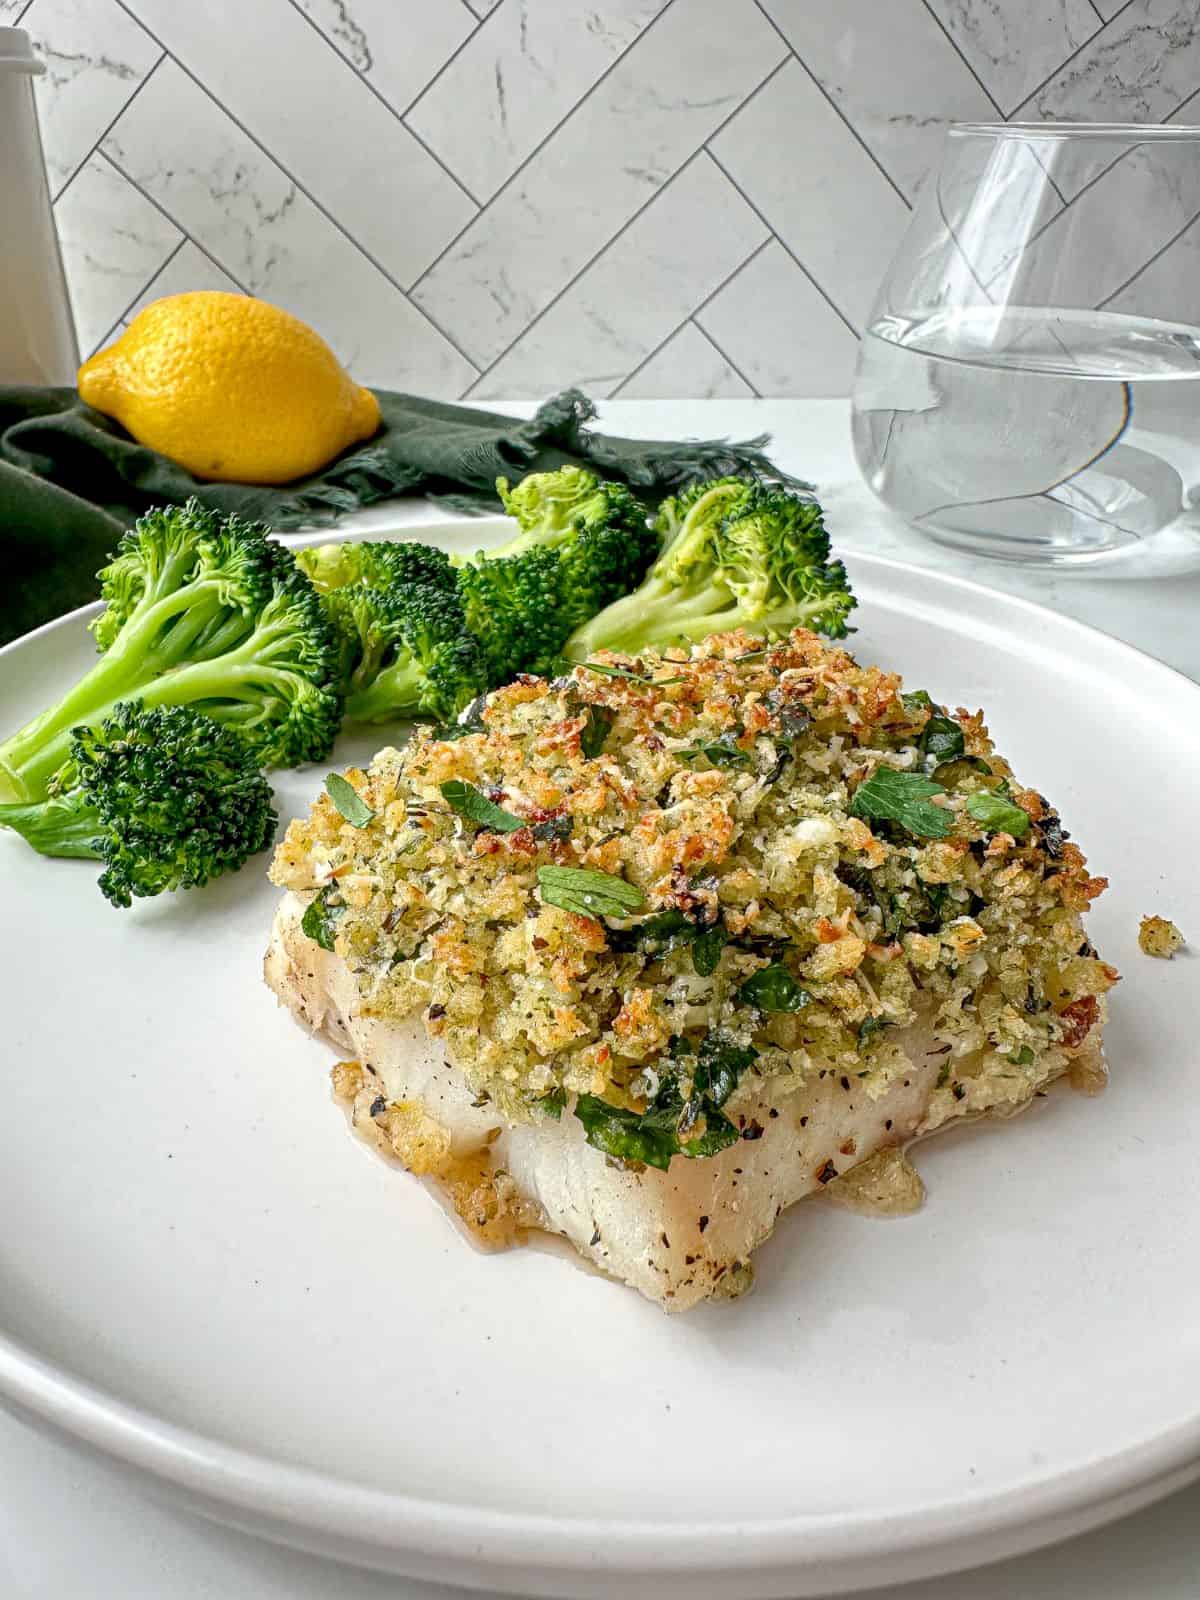 Parmesan panko crusted cod on a plate with broccoli. A green towel, glass of water, and lemon are in the background.